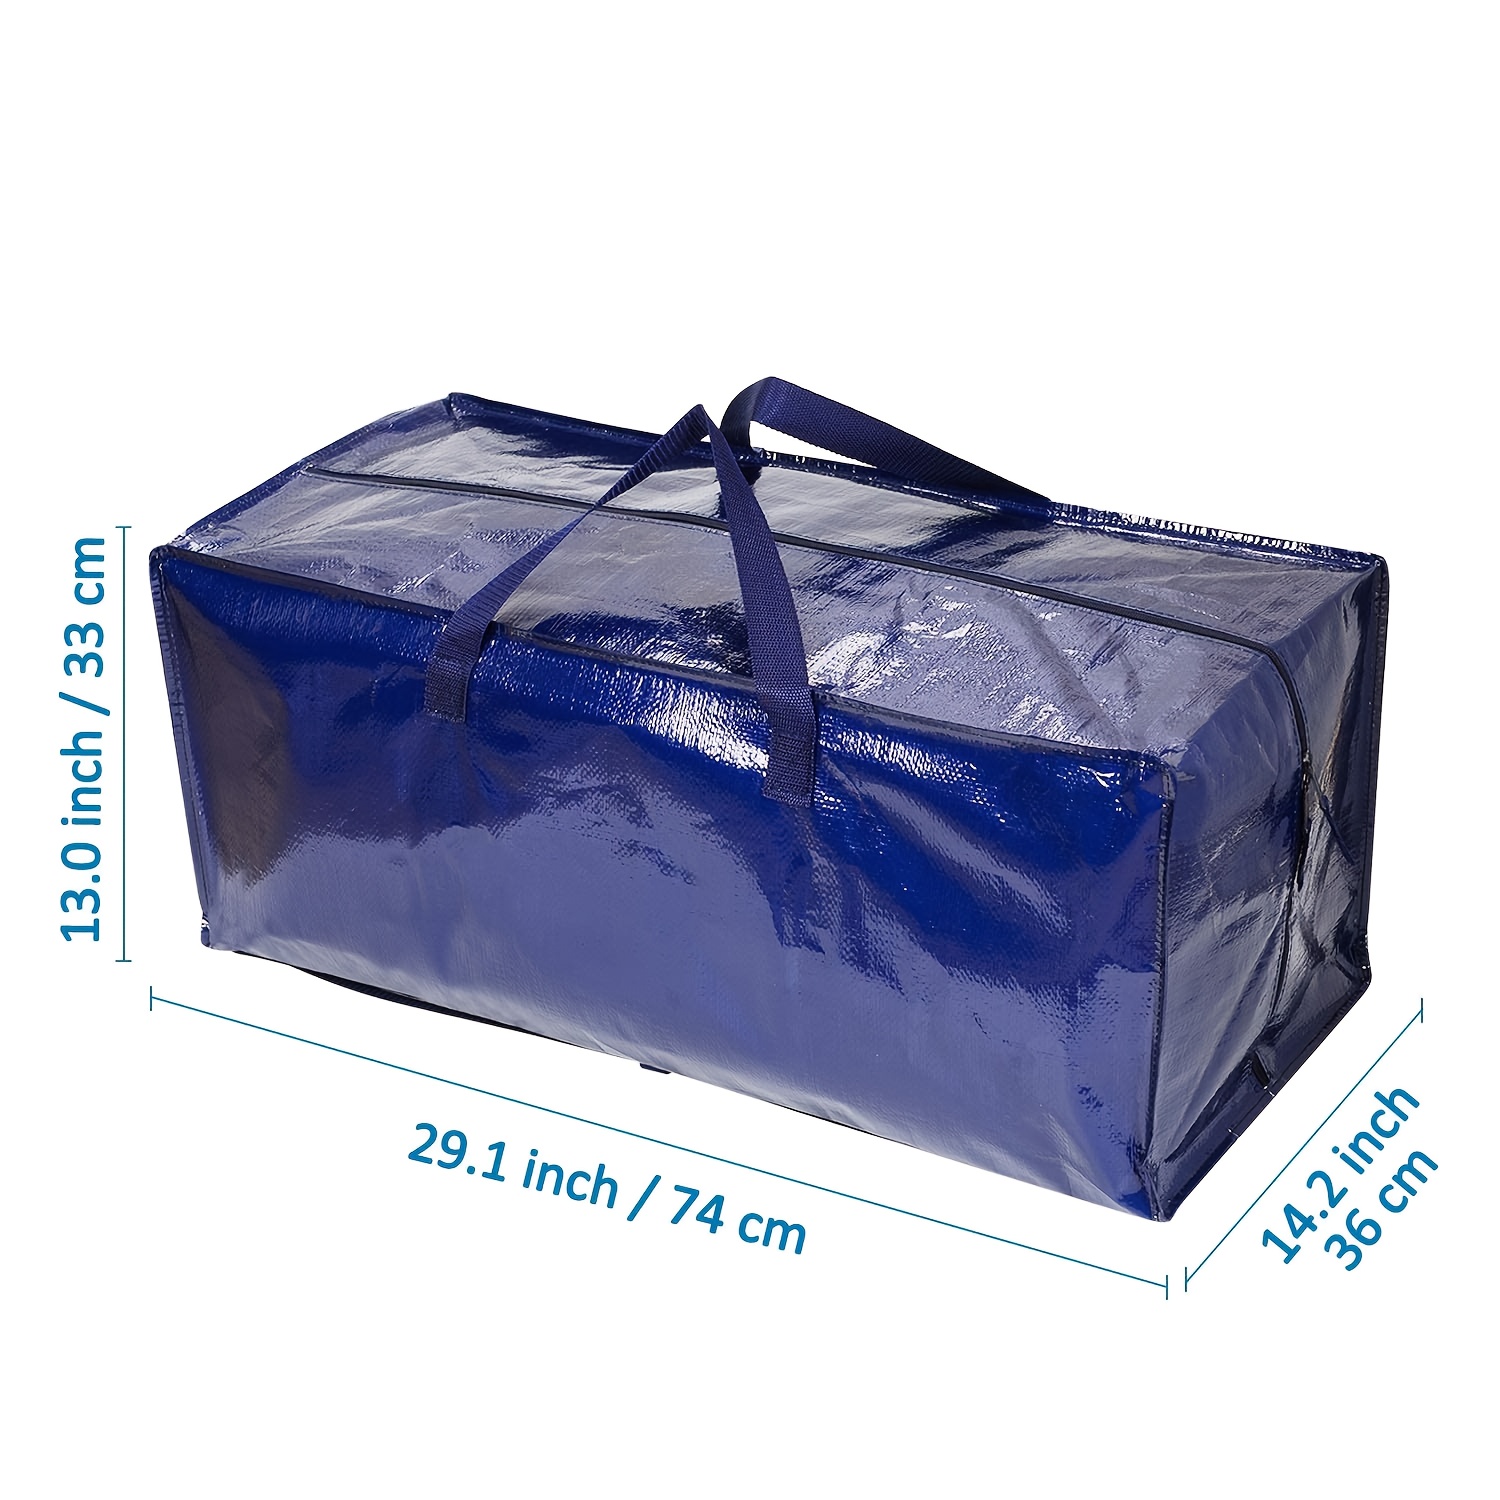  Moving Bags Heavy Duty,Extra Large Packing Bags for  Moving,Reusable Plastic Moving Totes,Moving Storage Bags for Clothes,Moving  Supplies Bins,Compatible with Ikea Frakta Cart (Blue,Set of 4) : Home &  Kitchen